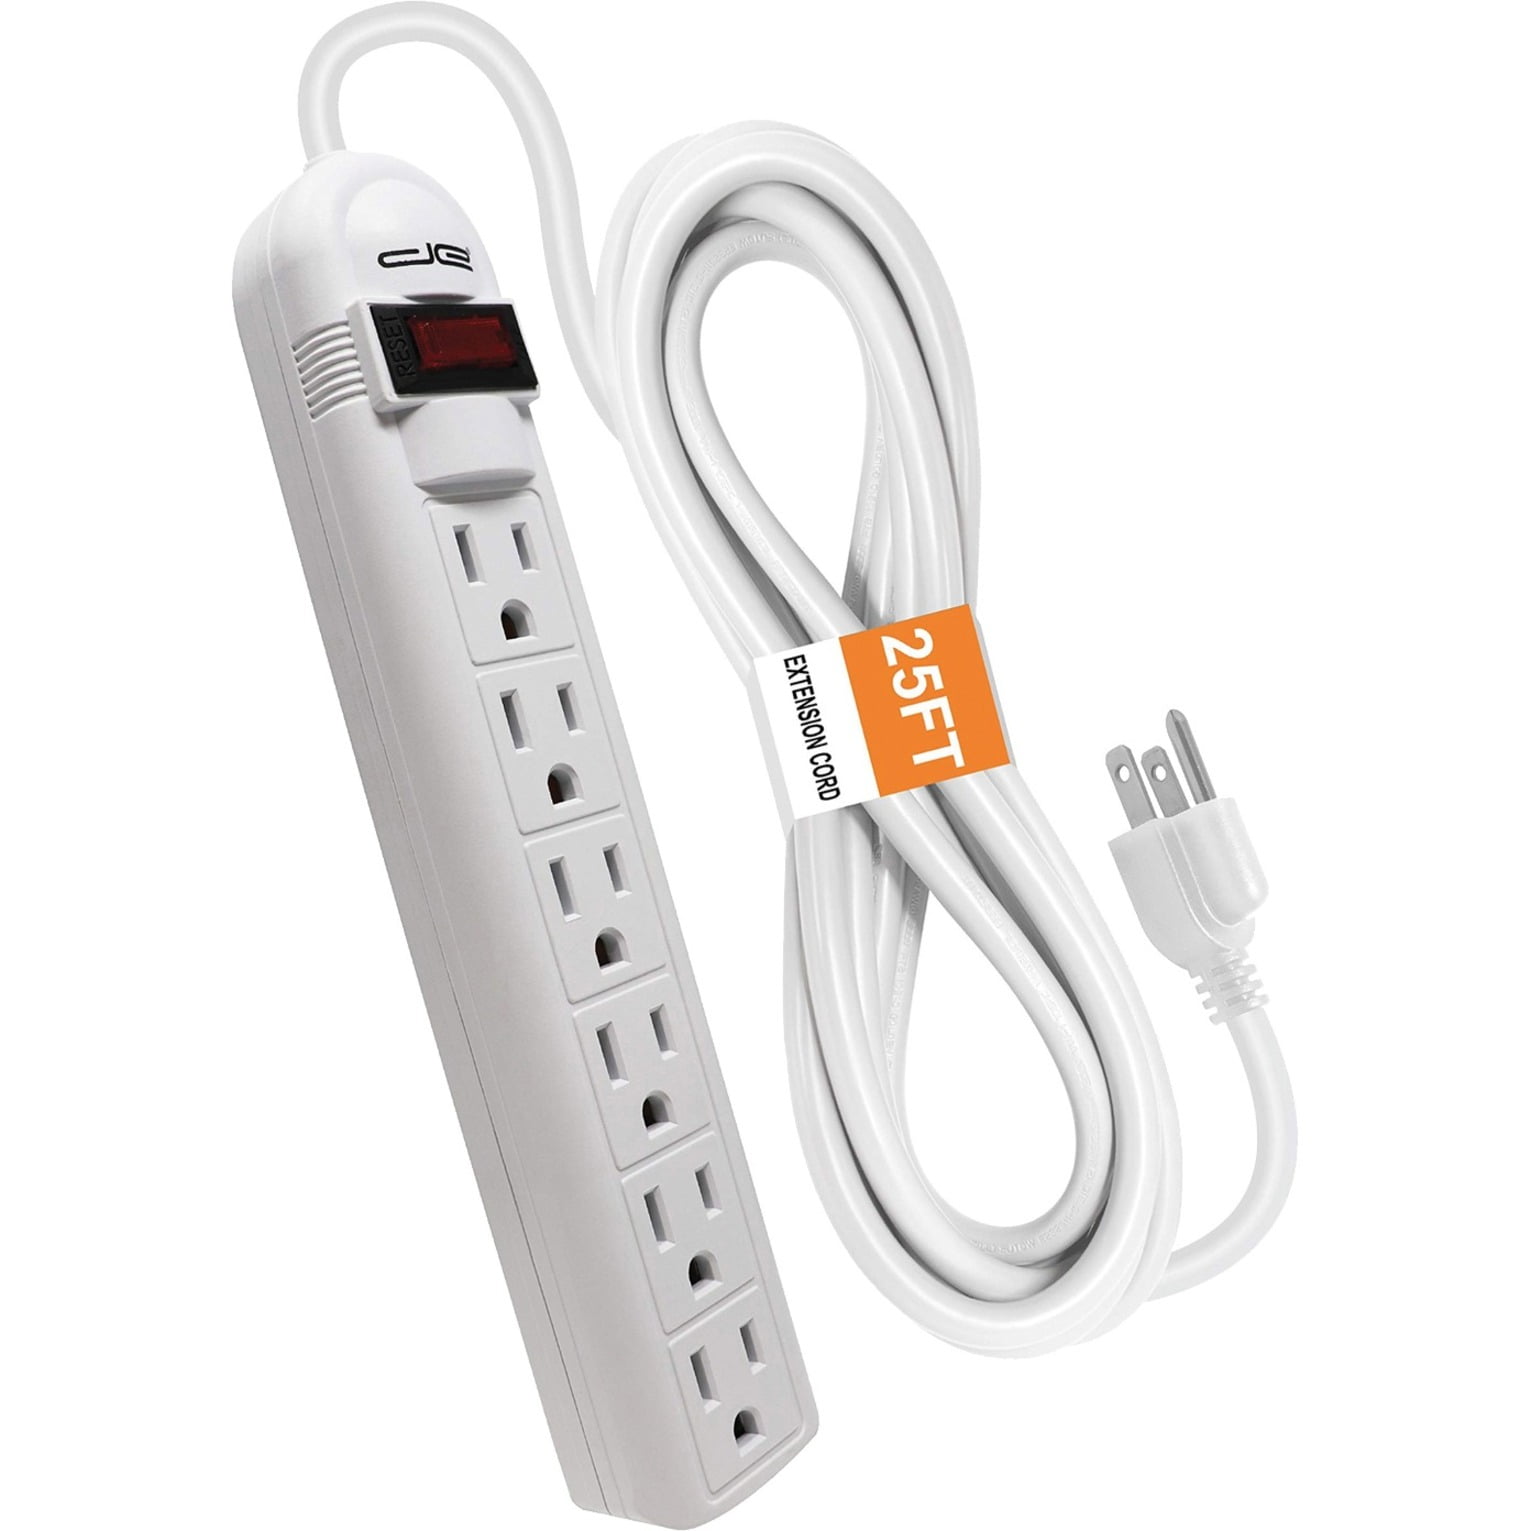 Digital Energy 6-Outlet Surge Protector Power Strip with 25-ft Long Extension Cord, White